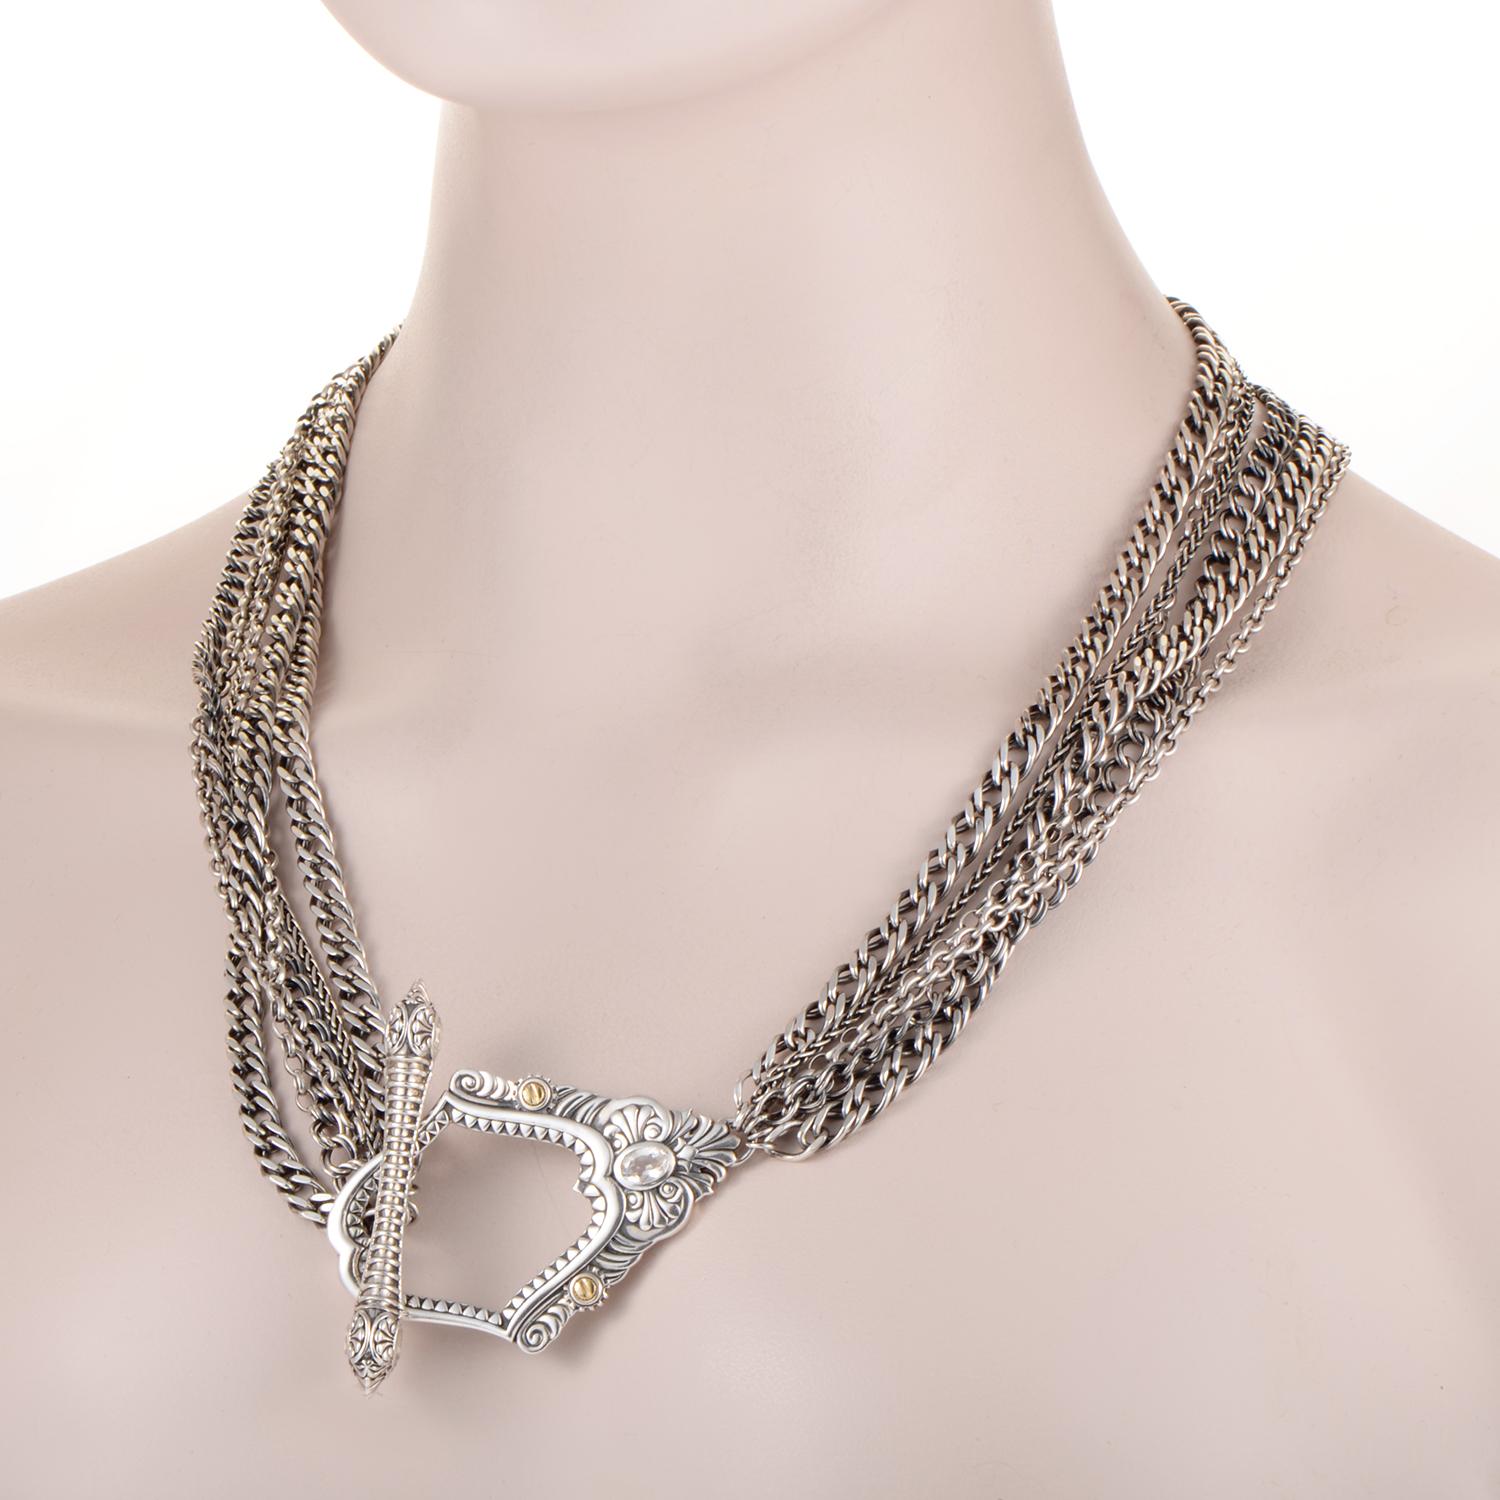 This extraordinary statement piece boasts a stunning pendant that is designed in a compellingly offbeat fashion, attached onto multiple, diversely stylized chains for an intriguing effect. The necklace is presented by Stephen Webster within the